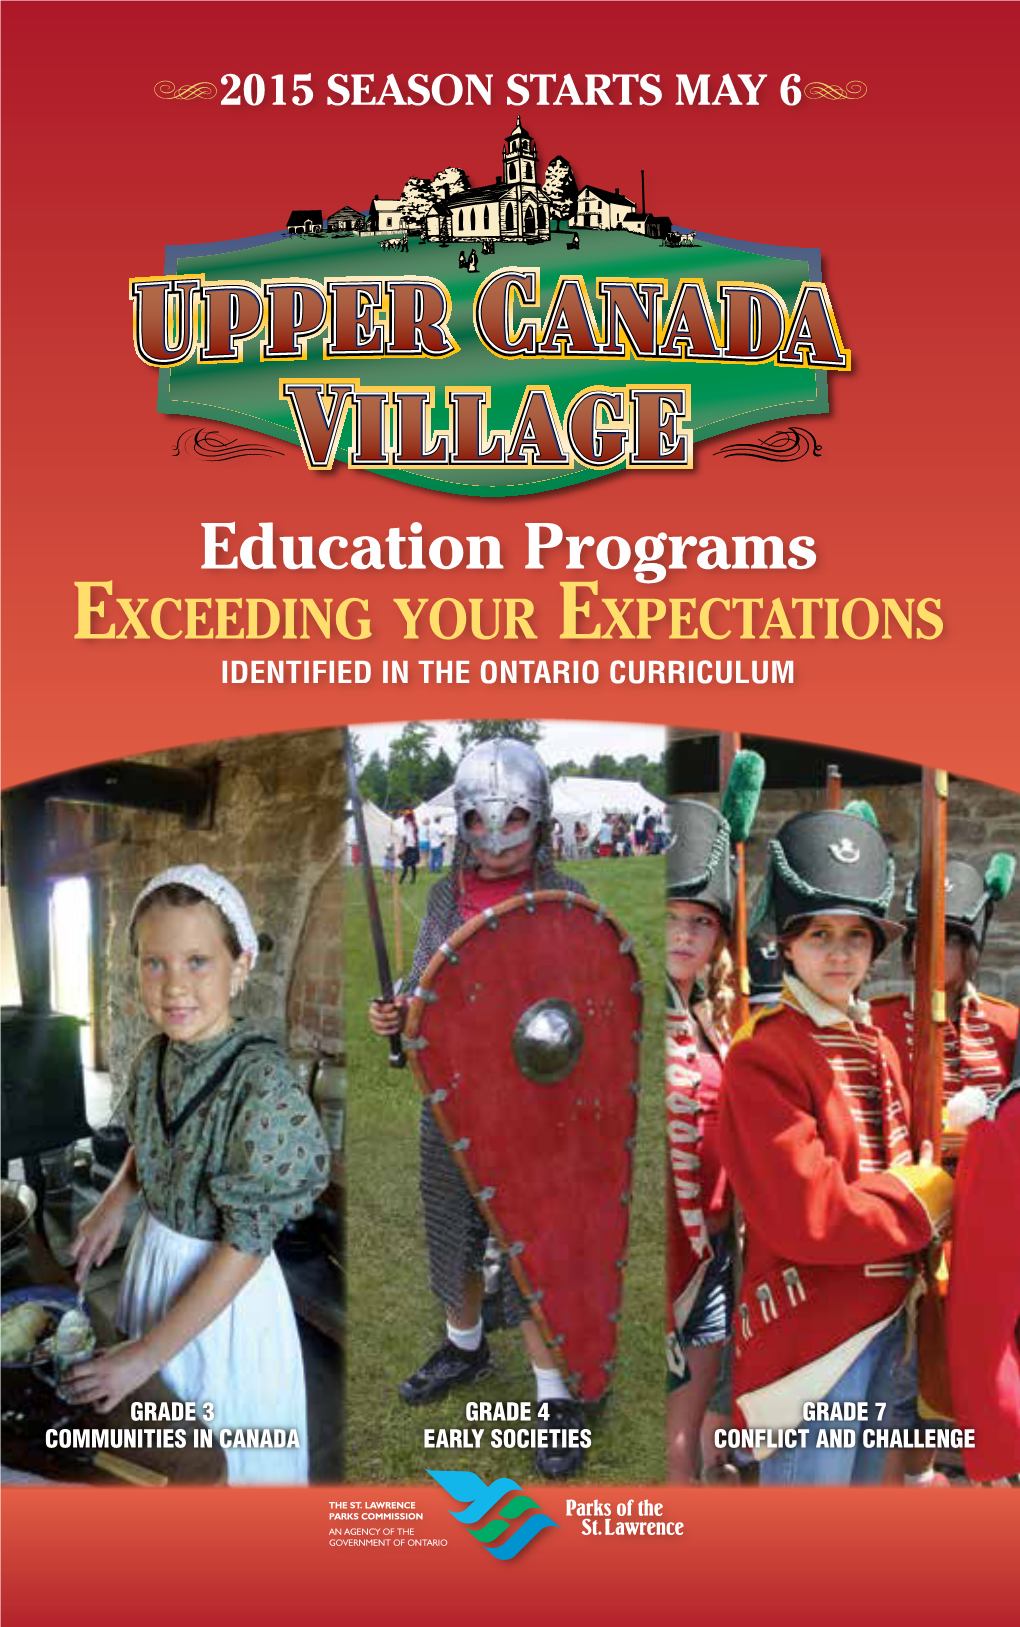 Education Programs Exceeding Your Expectations Identified in the Ontario Curriculum